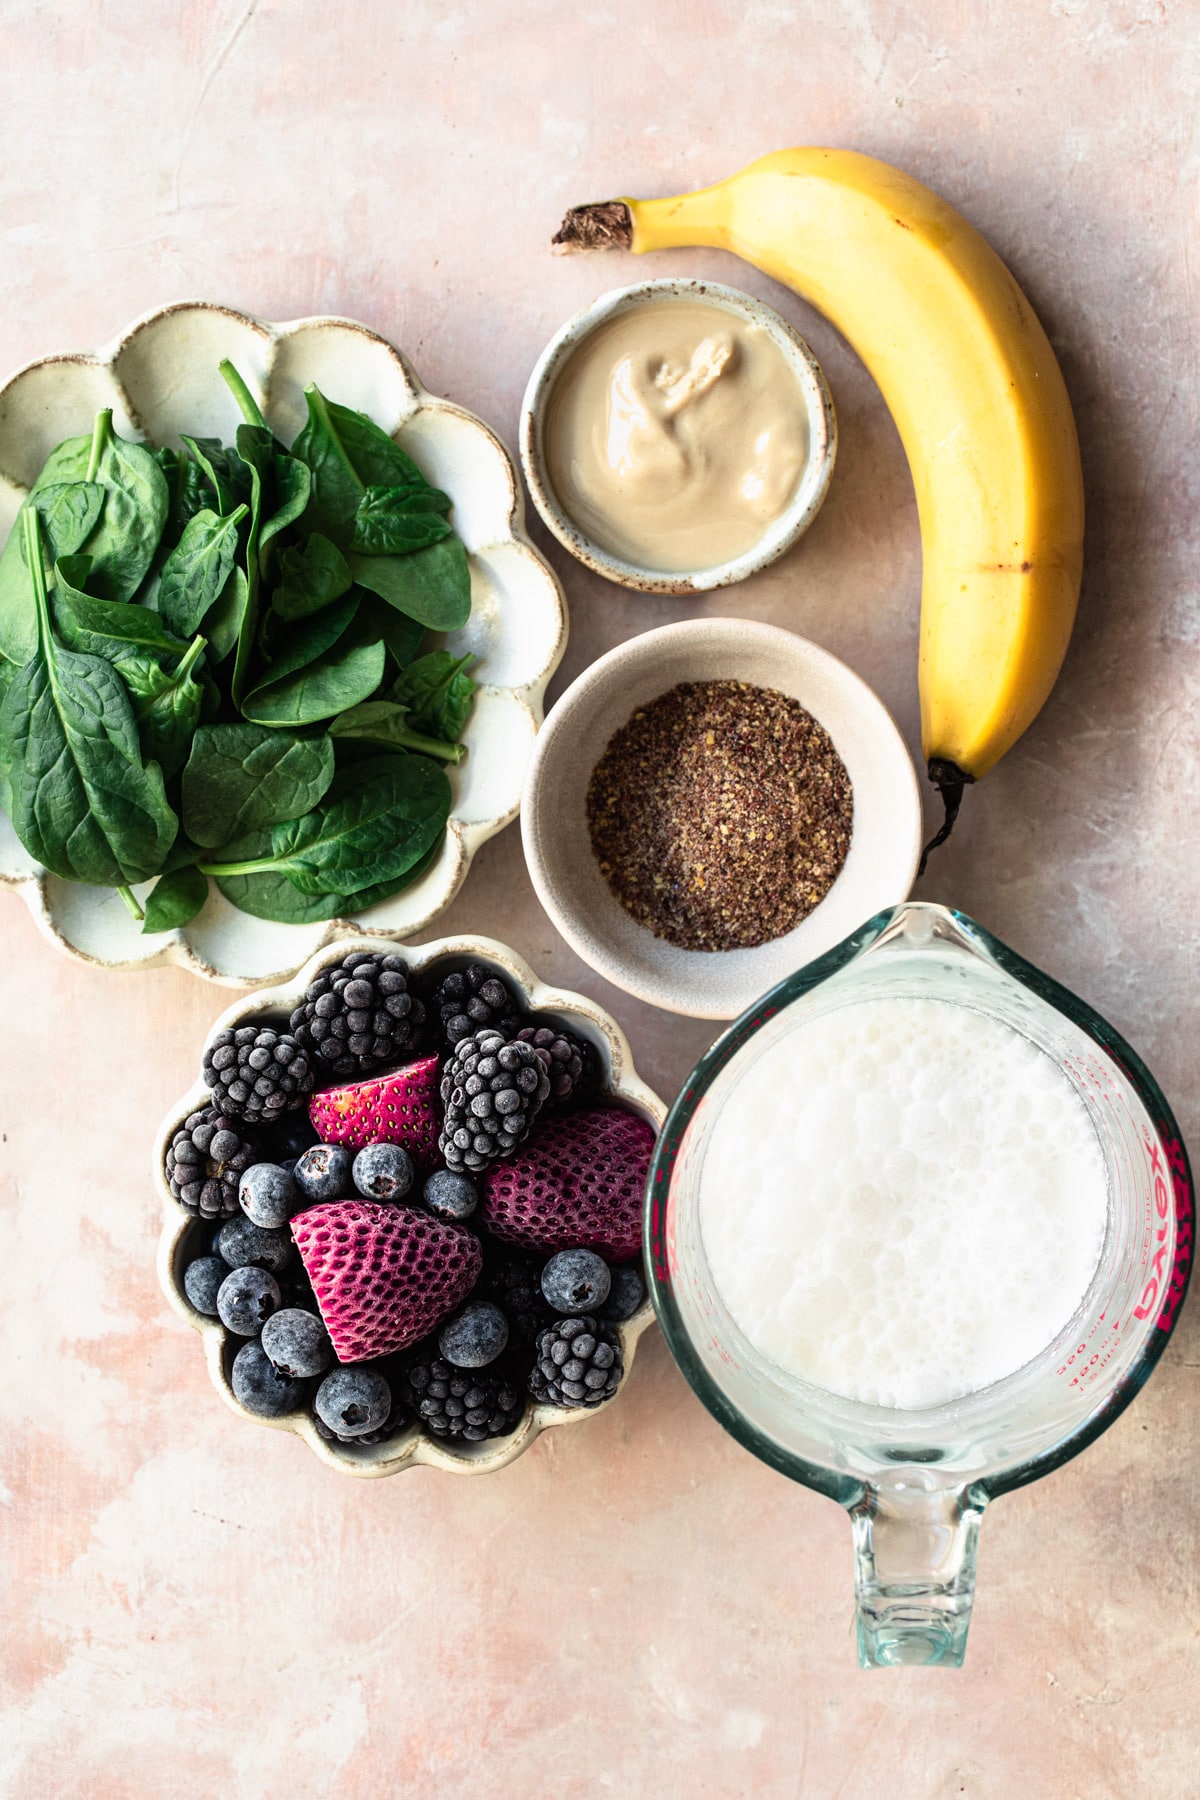 Ingredients for spinach berry smoothie including spinach, berries, coconut milk, flaxseed meal and tahini, laid out in individual bowls on a pink backdrop.